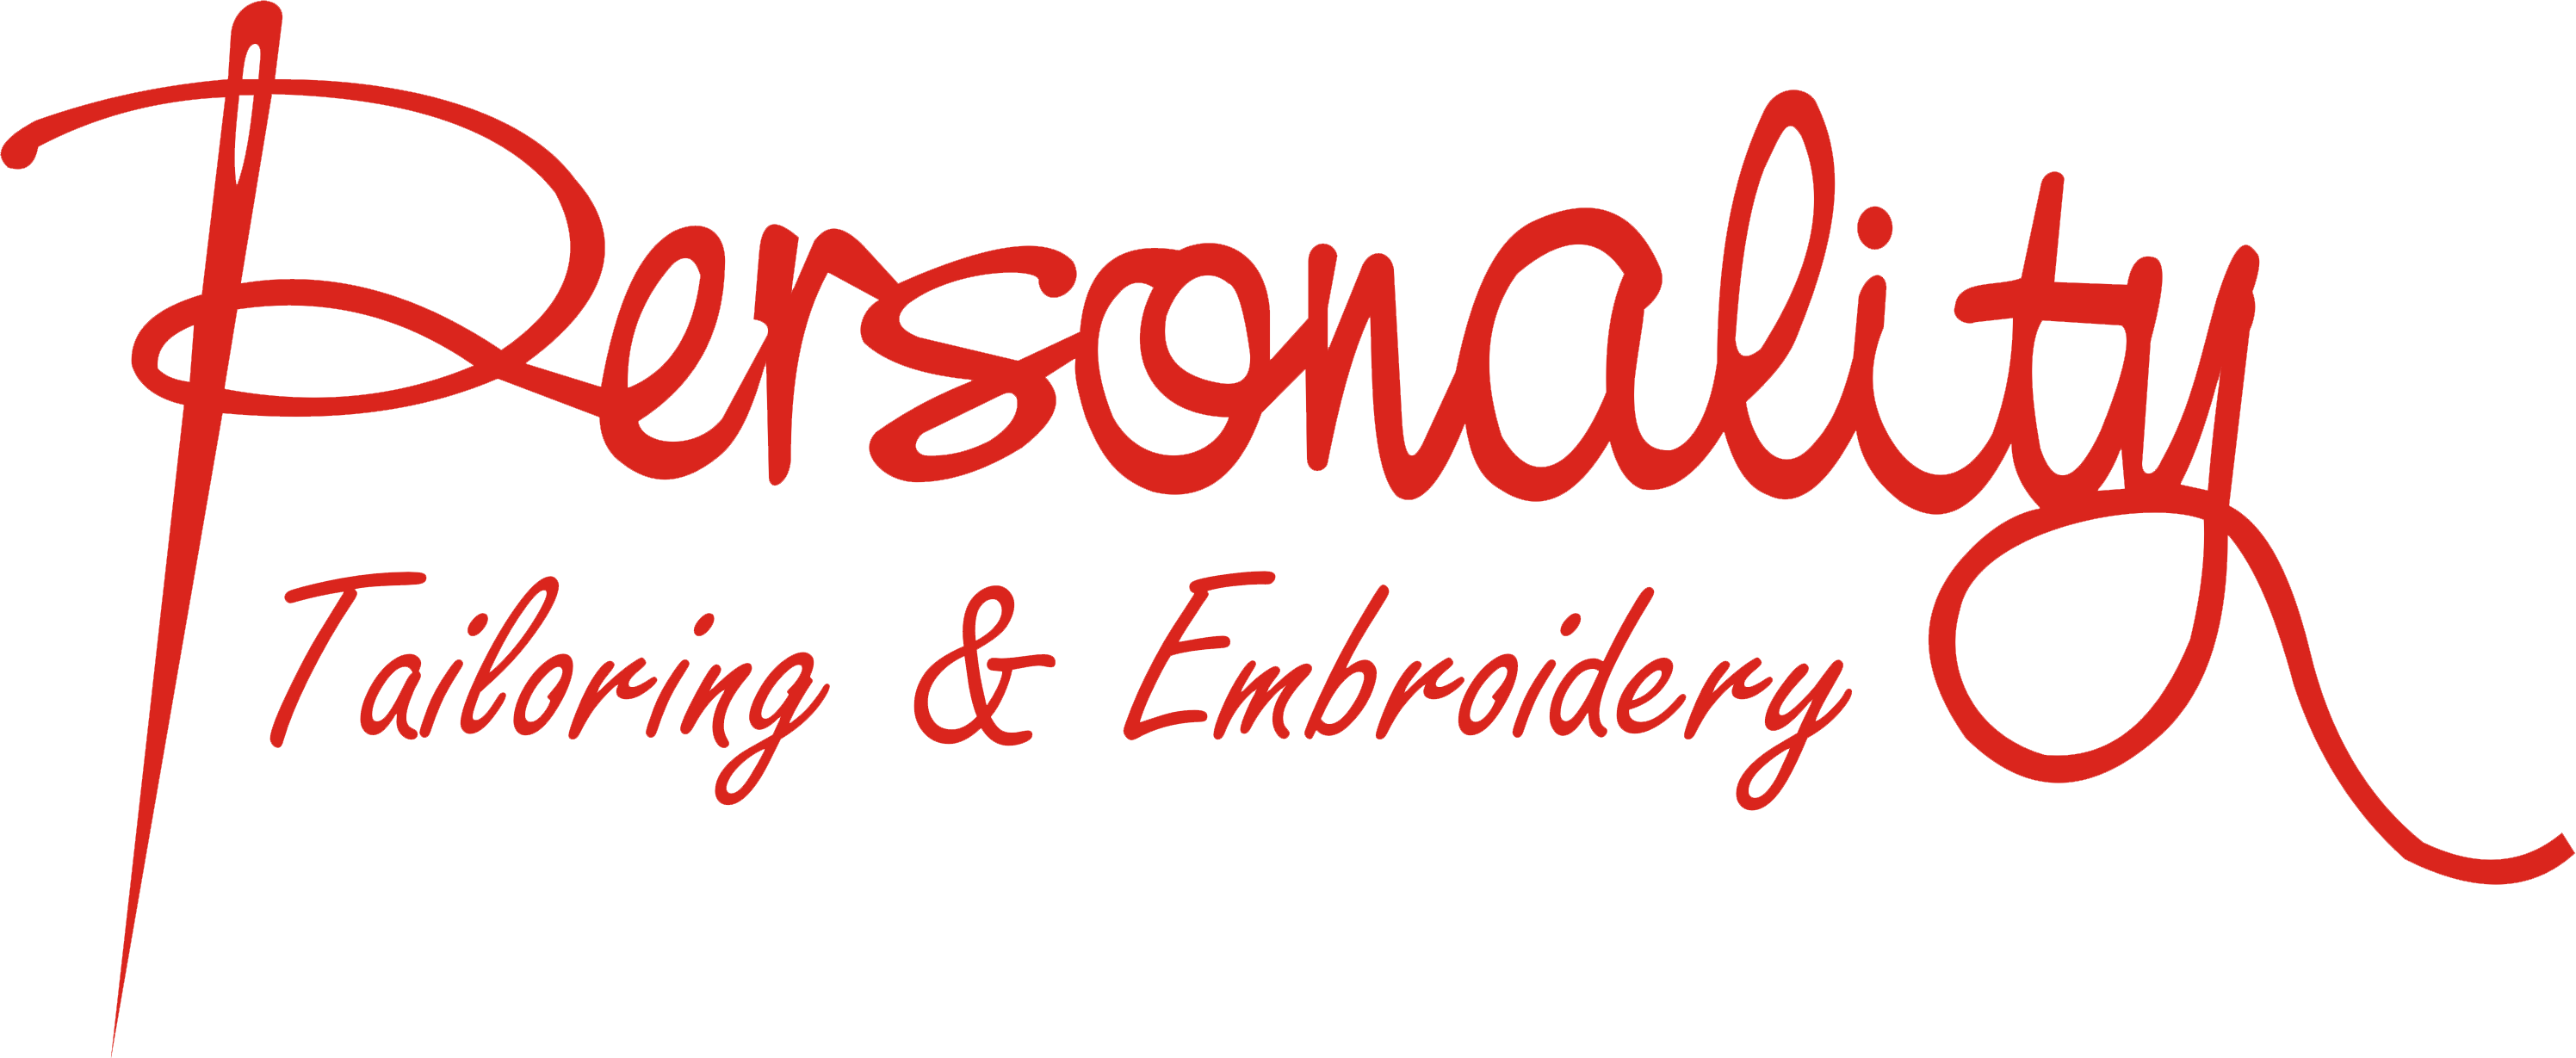 Personality Tailoring & Embroidery